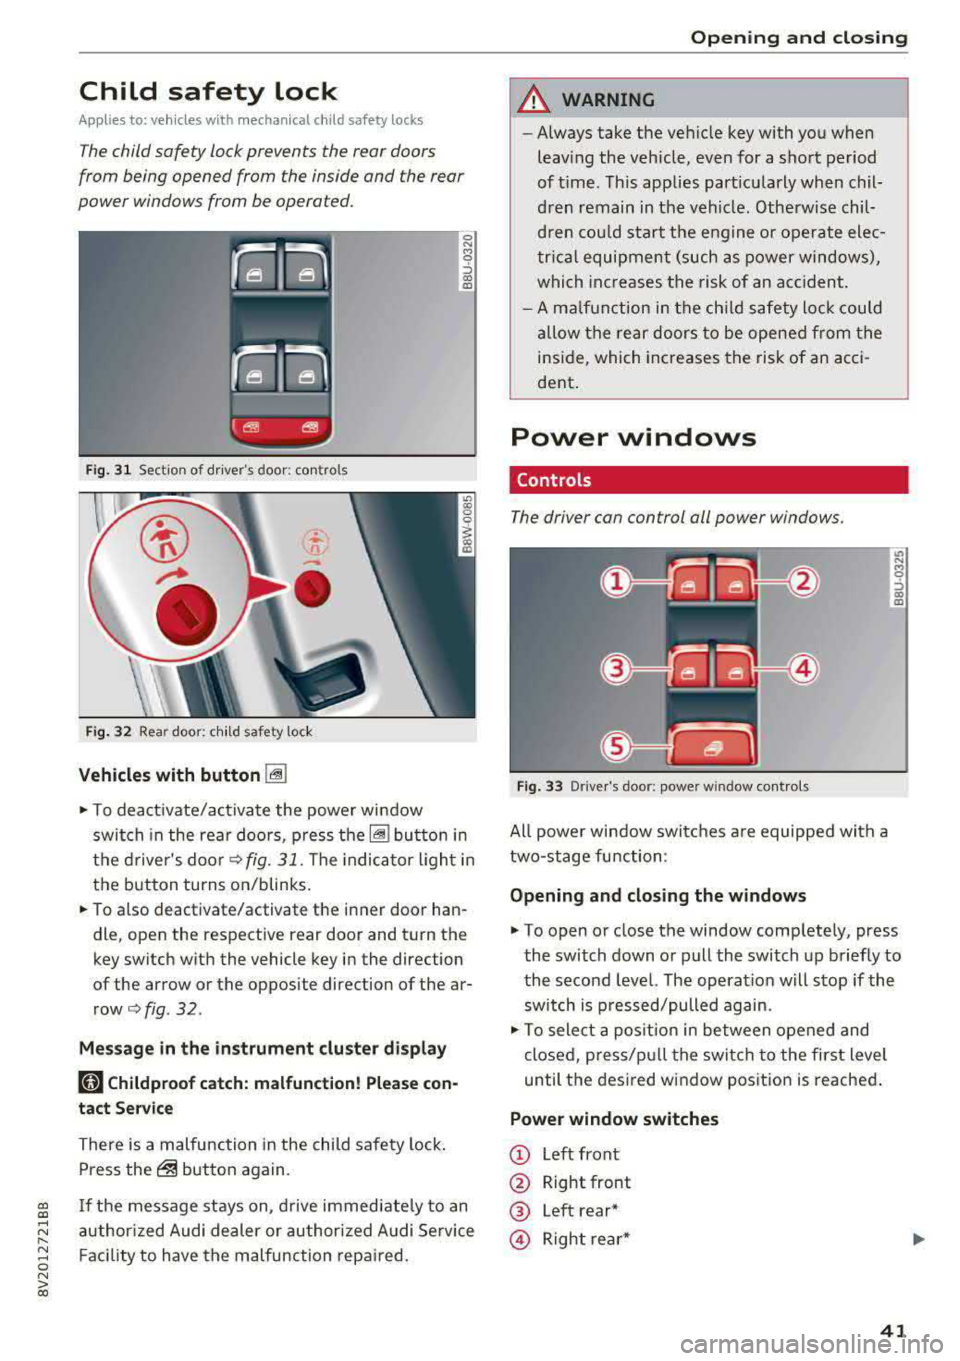 AUDI A3 SEDAN 2017 Service Manual Child  safety  lock 
App lies  to: ve hicles  wit h m echan ica l ch ild sa fety locks 
The child  safety  lock prevents  the  rear  doors 
from  being  opened  from  the  inside  and  the  rear 
powe